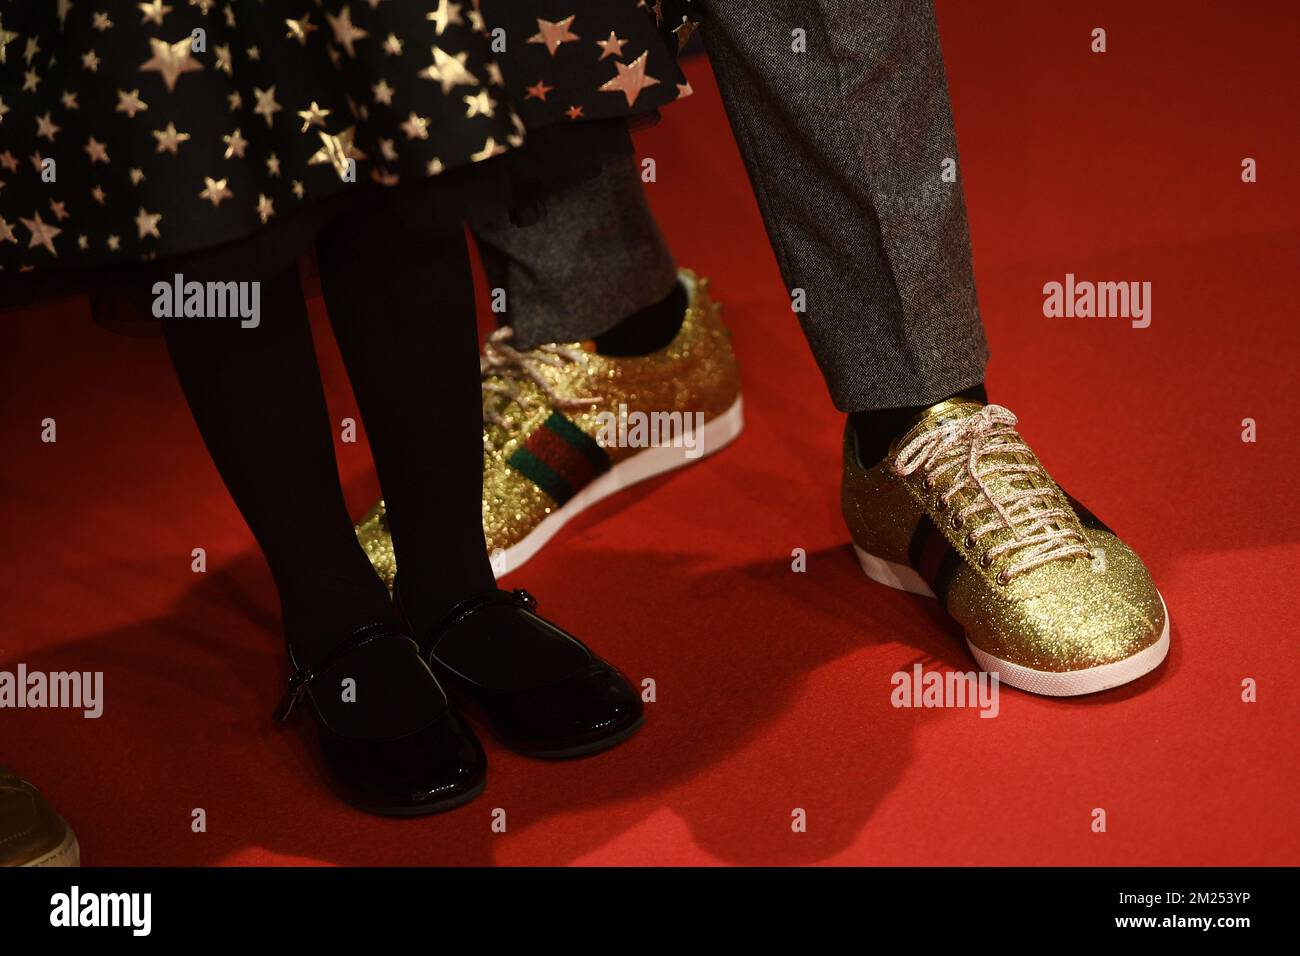 Illustration picture shows shoes pictured on the red carpet, arriving for  the 63th edition of the 'Golden Shoe' award ceremony, Wednesday 08 February  2017, in Lint. The Golden Shoe (Gouden Schoen /